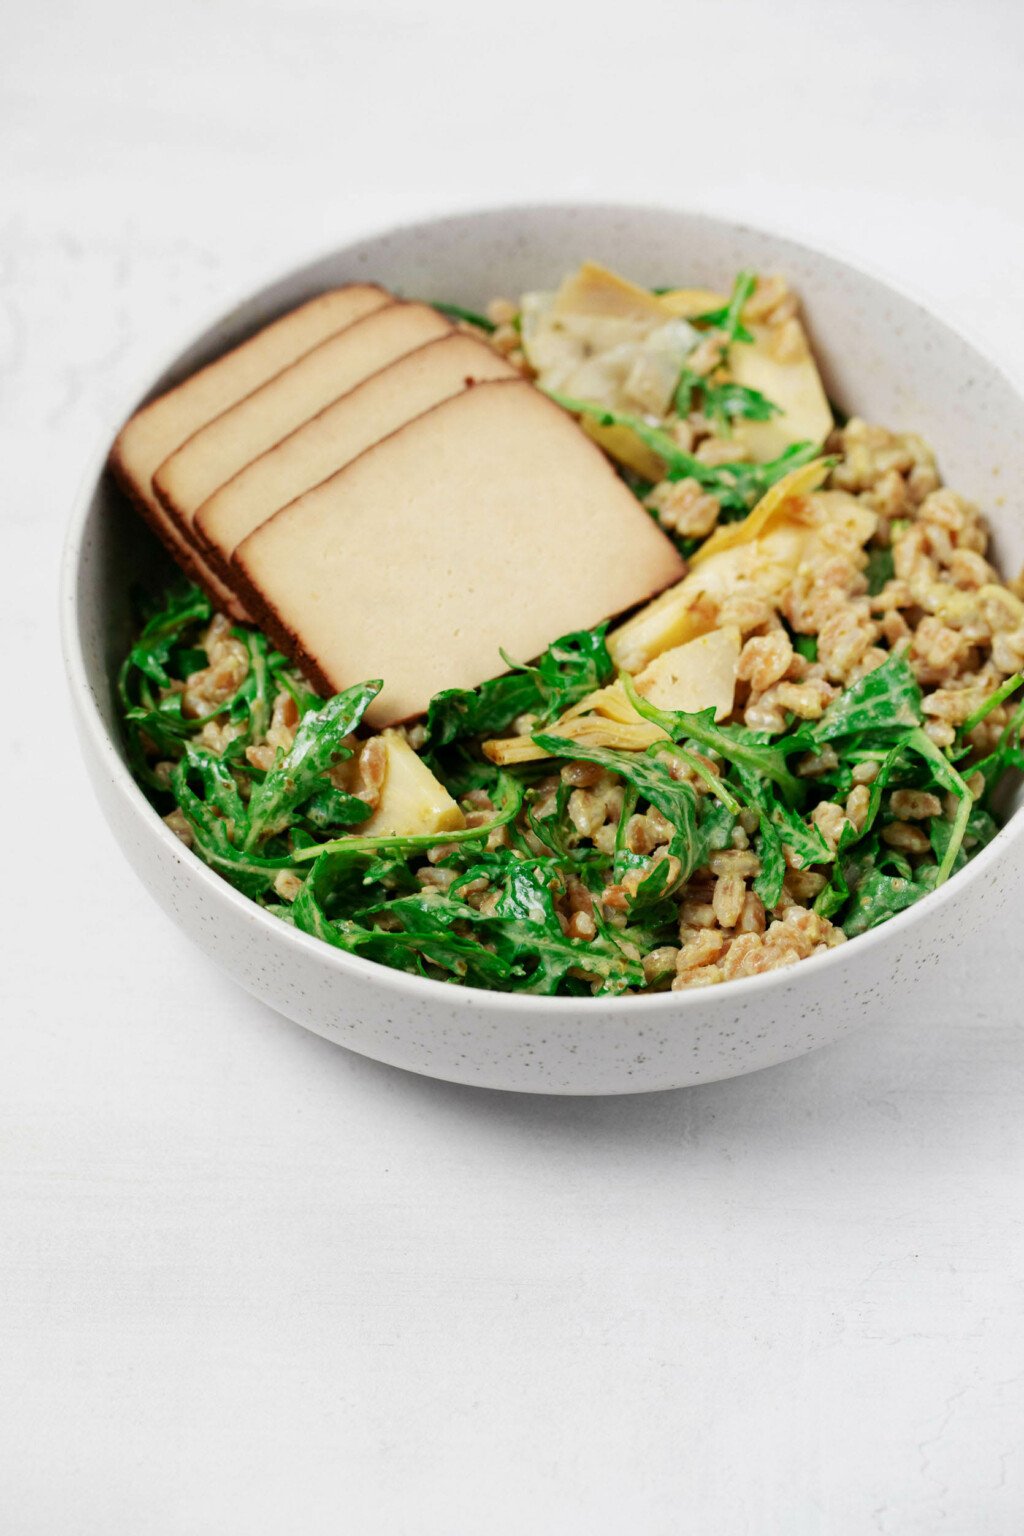 An angled, close up image of a round, white bowl, which is filled with farro, kale, artichokes, and tofu. The farro is dressed with herby pesto.